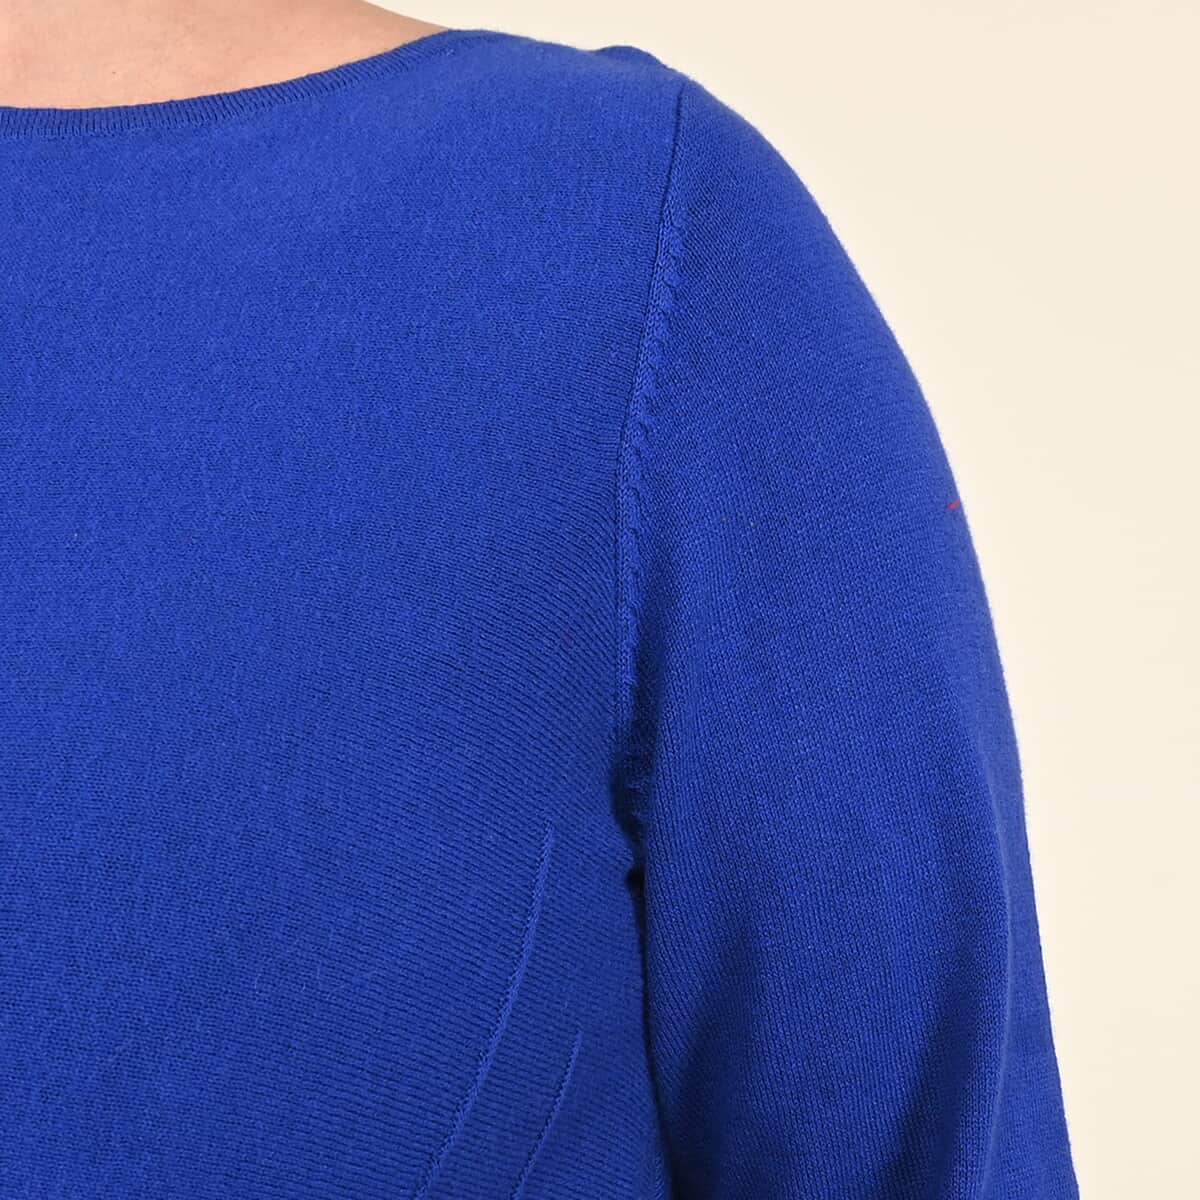 Tamsy Blue Long Sleeves with Ribbed Cuffs, Crew Neck Tunic Sweater - XL image number 3